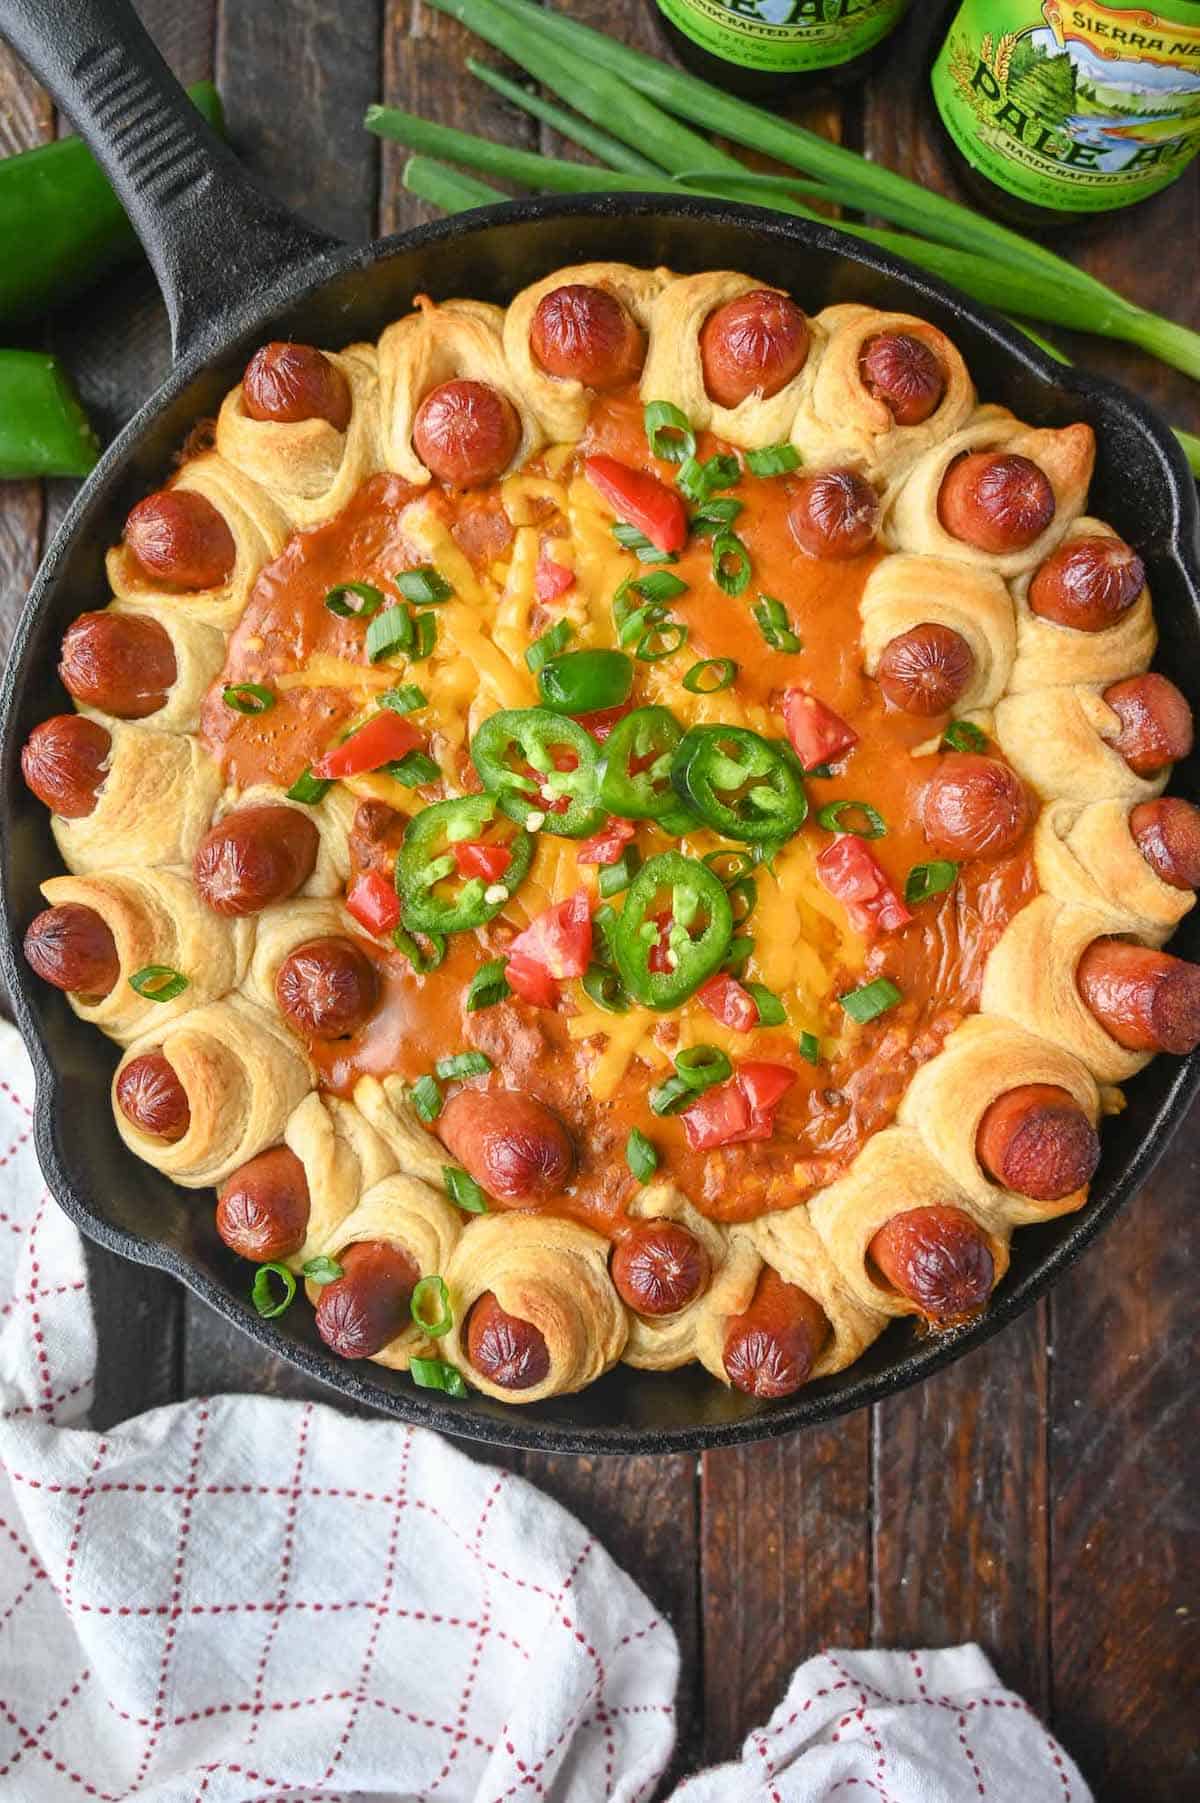 A cast iron skillet with wrapped mini hotdogs and a chili dip in the middle.